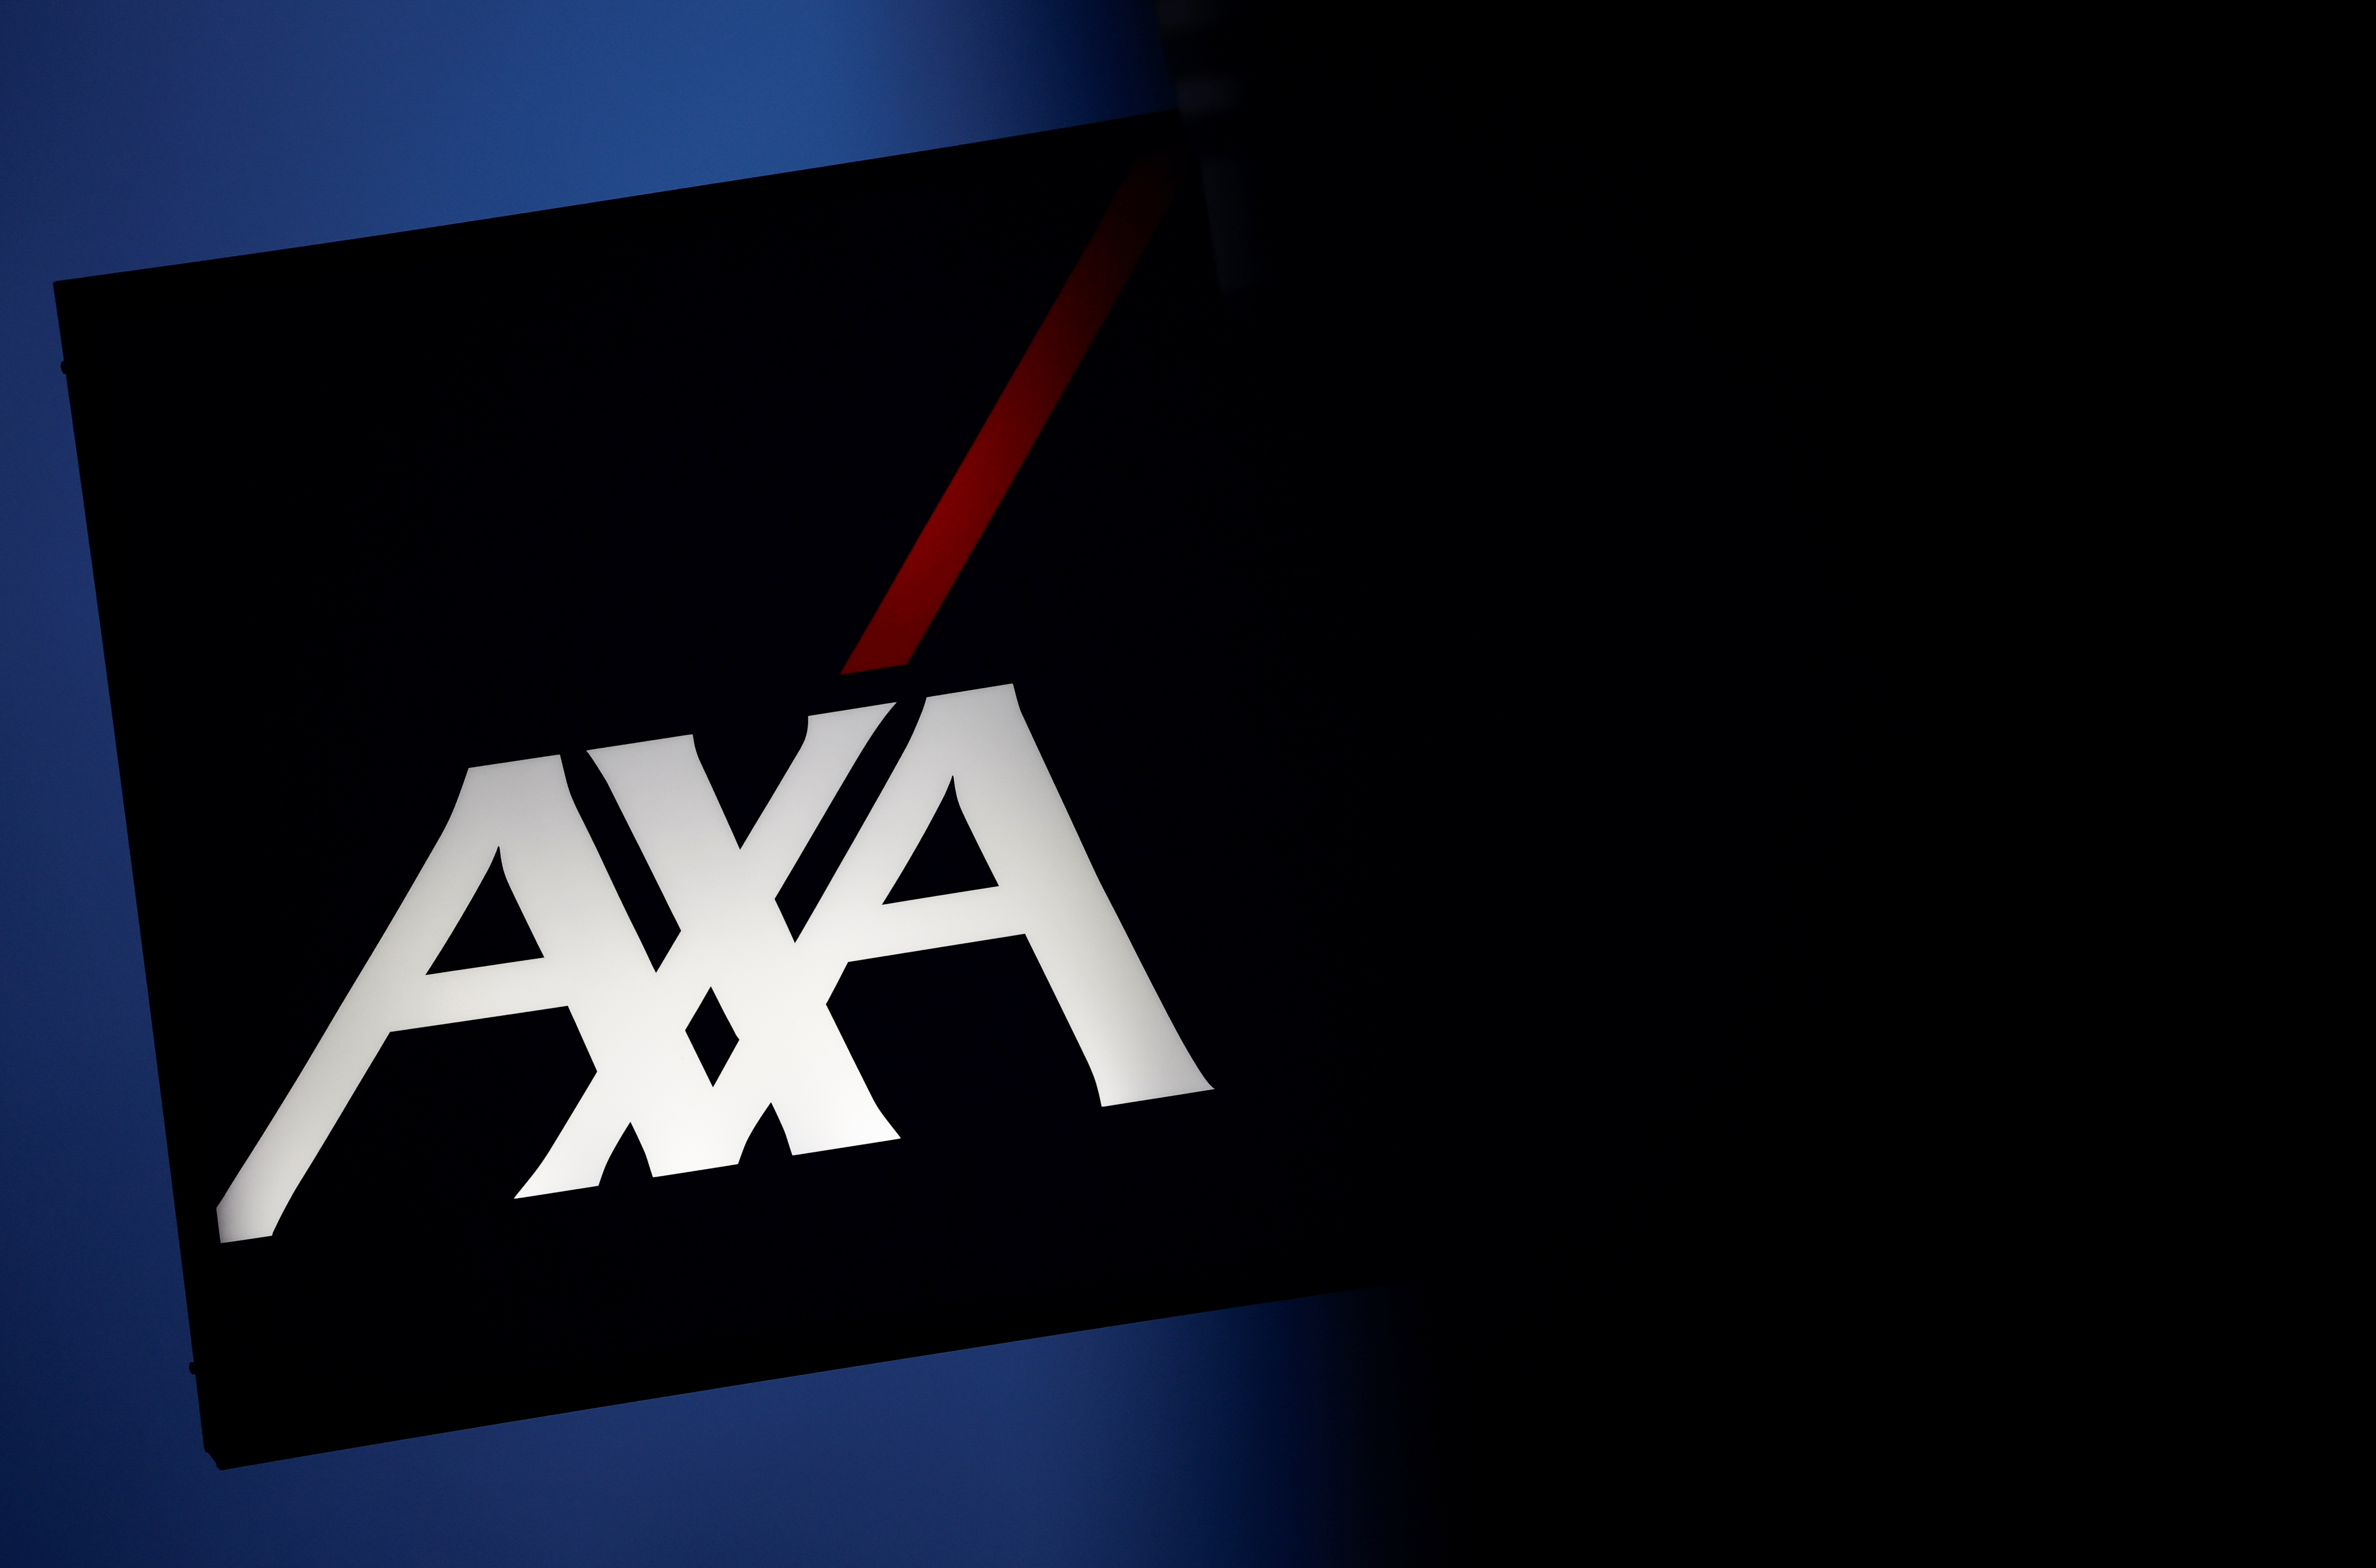 The logo of French Insurer Axa is seen outside a building in Montaigu